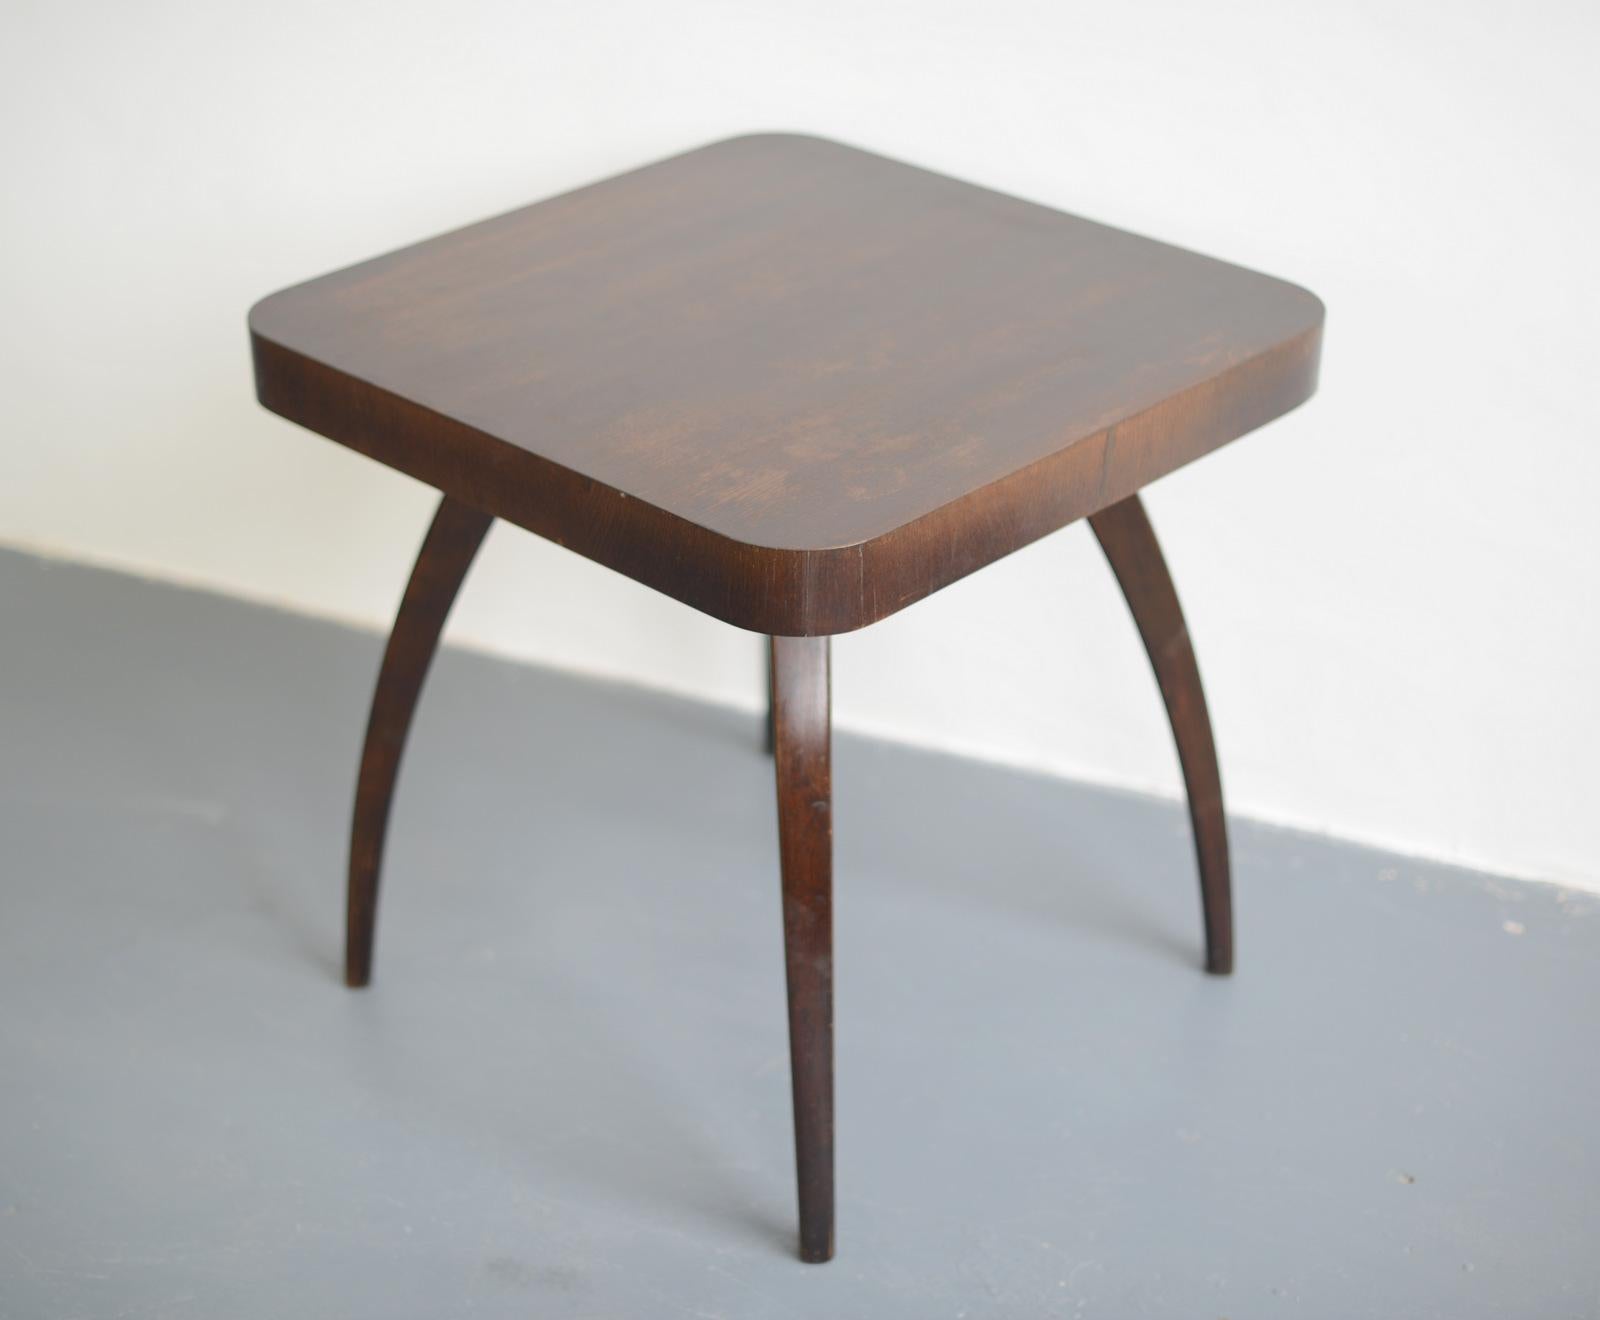 Spider table by Jindrich Halabala, circa 1940s

- Curved beech legs with veneered top
- Designed by Jindrich Halabala
- Czech 1940s
- 65cm x 65cm x 65cm

Jindrich Halabala

Jindrich Halabala helped create a new mass-market approach to home